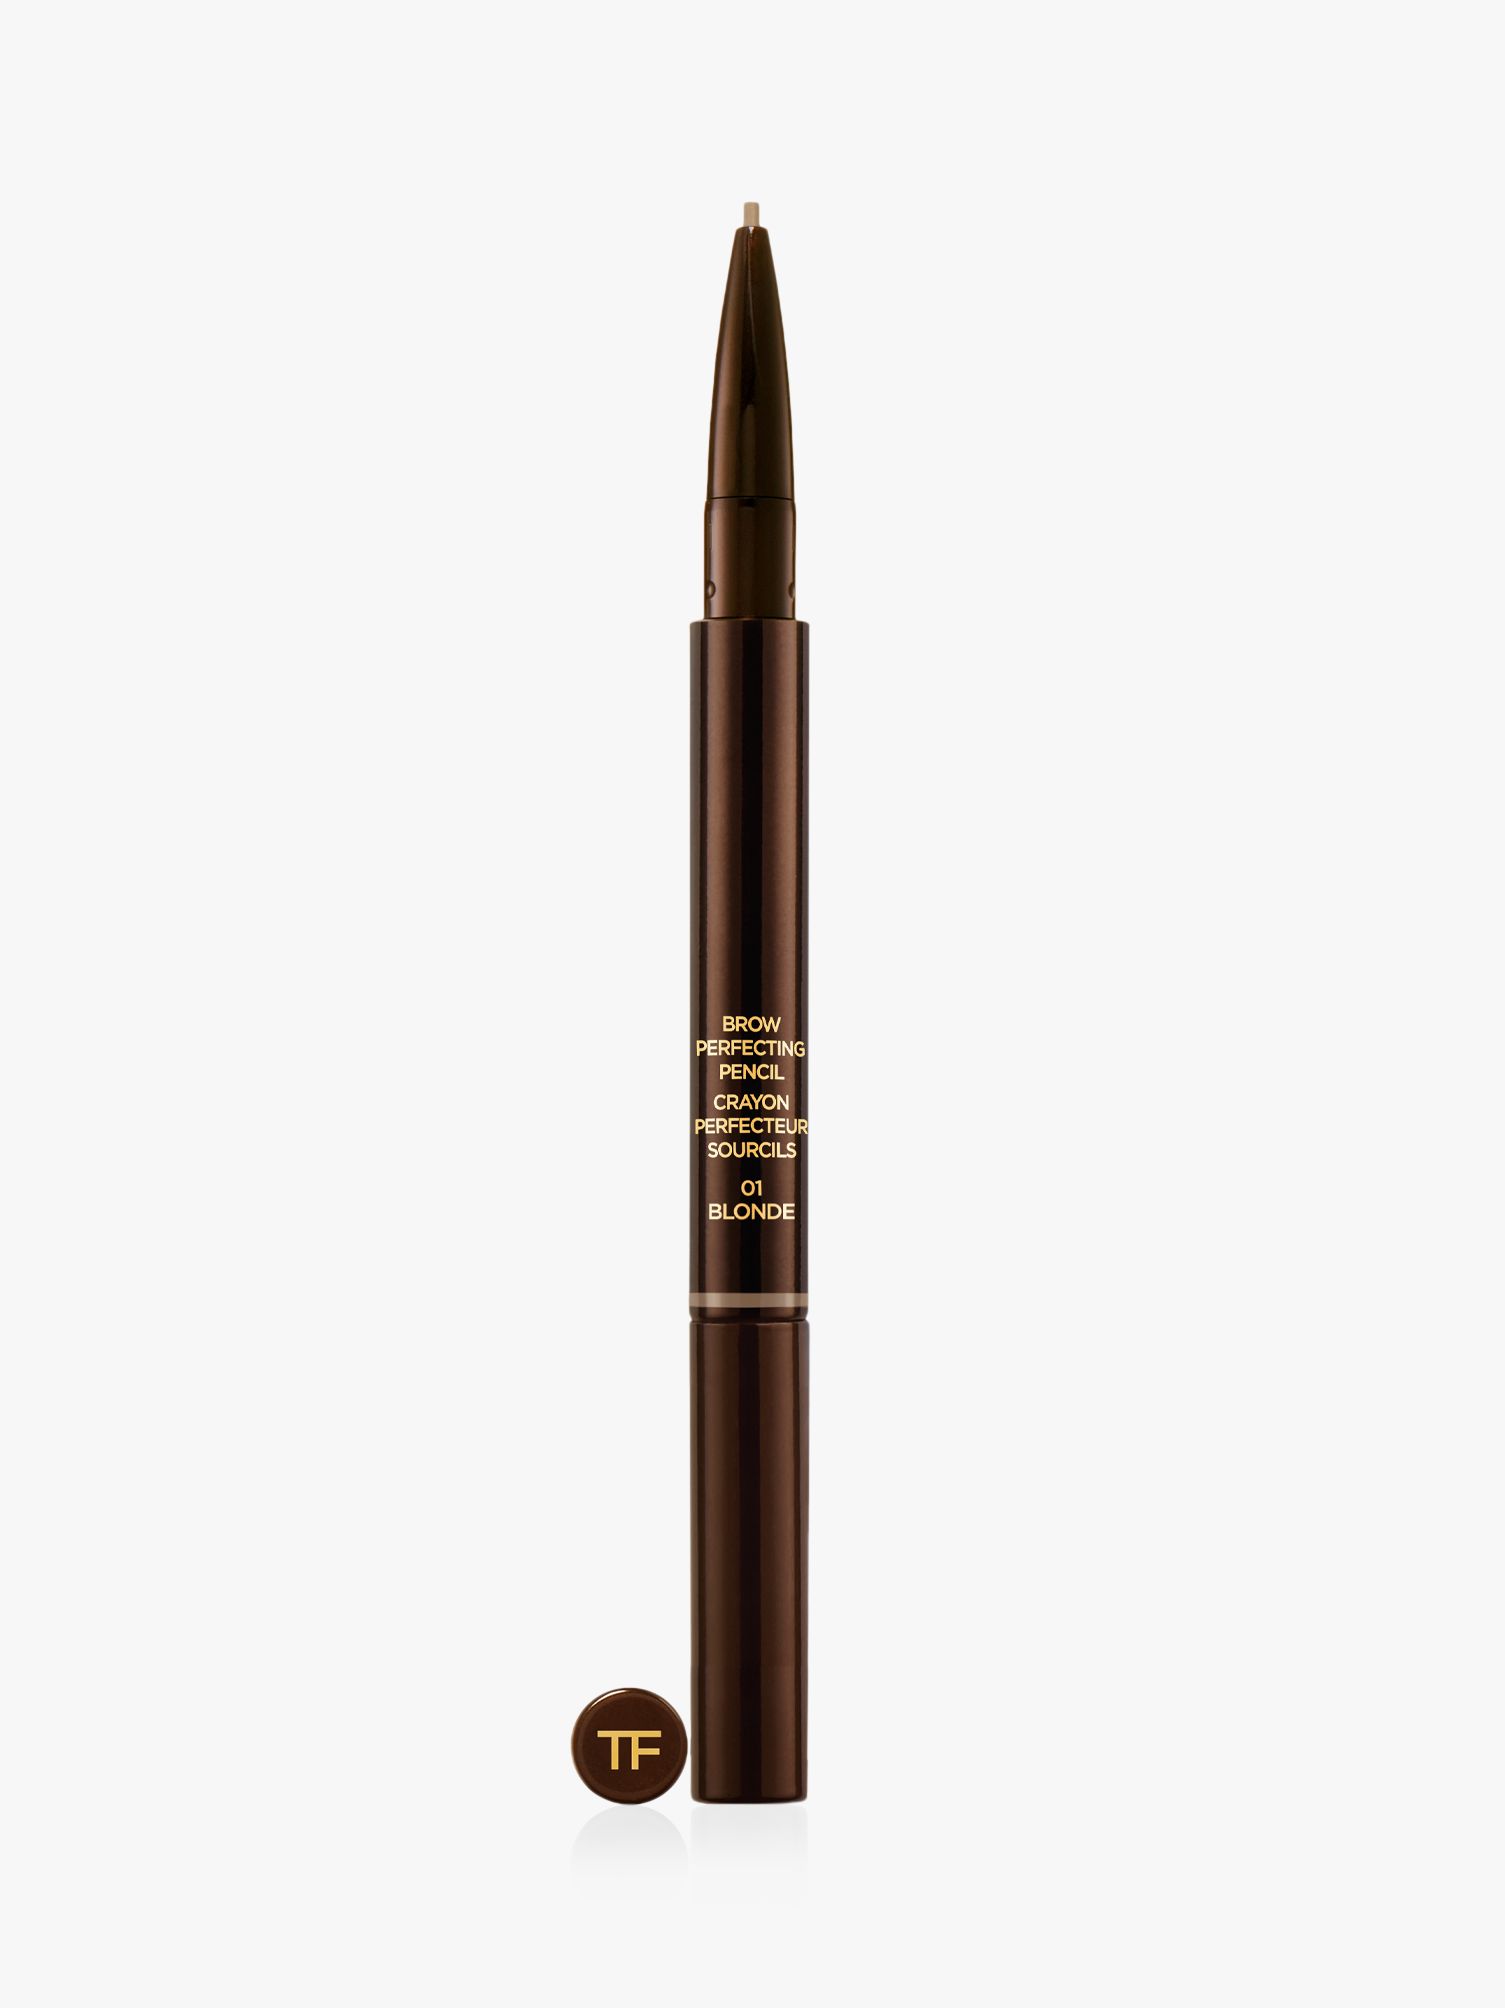 TOM FORD Brow Perfecting Pencil